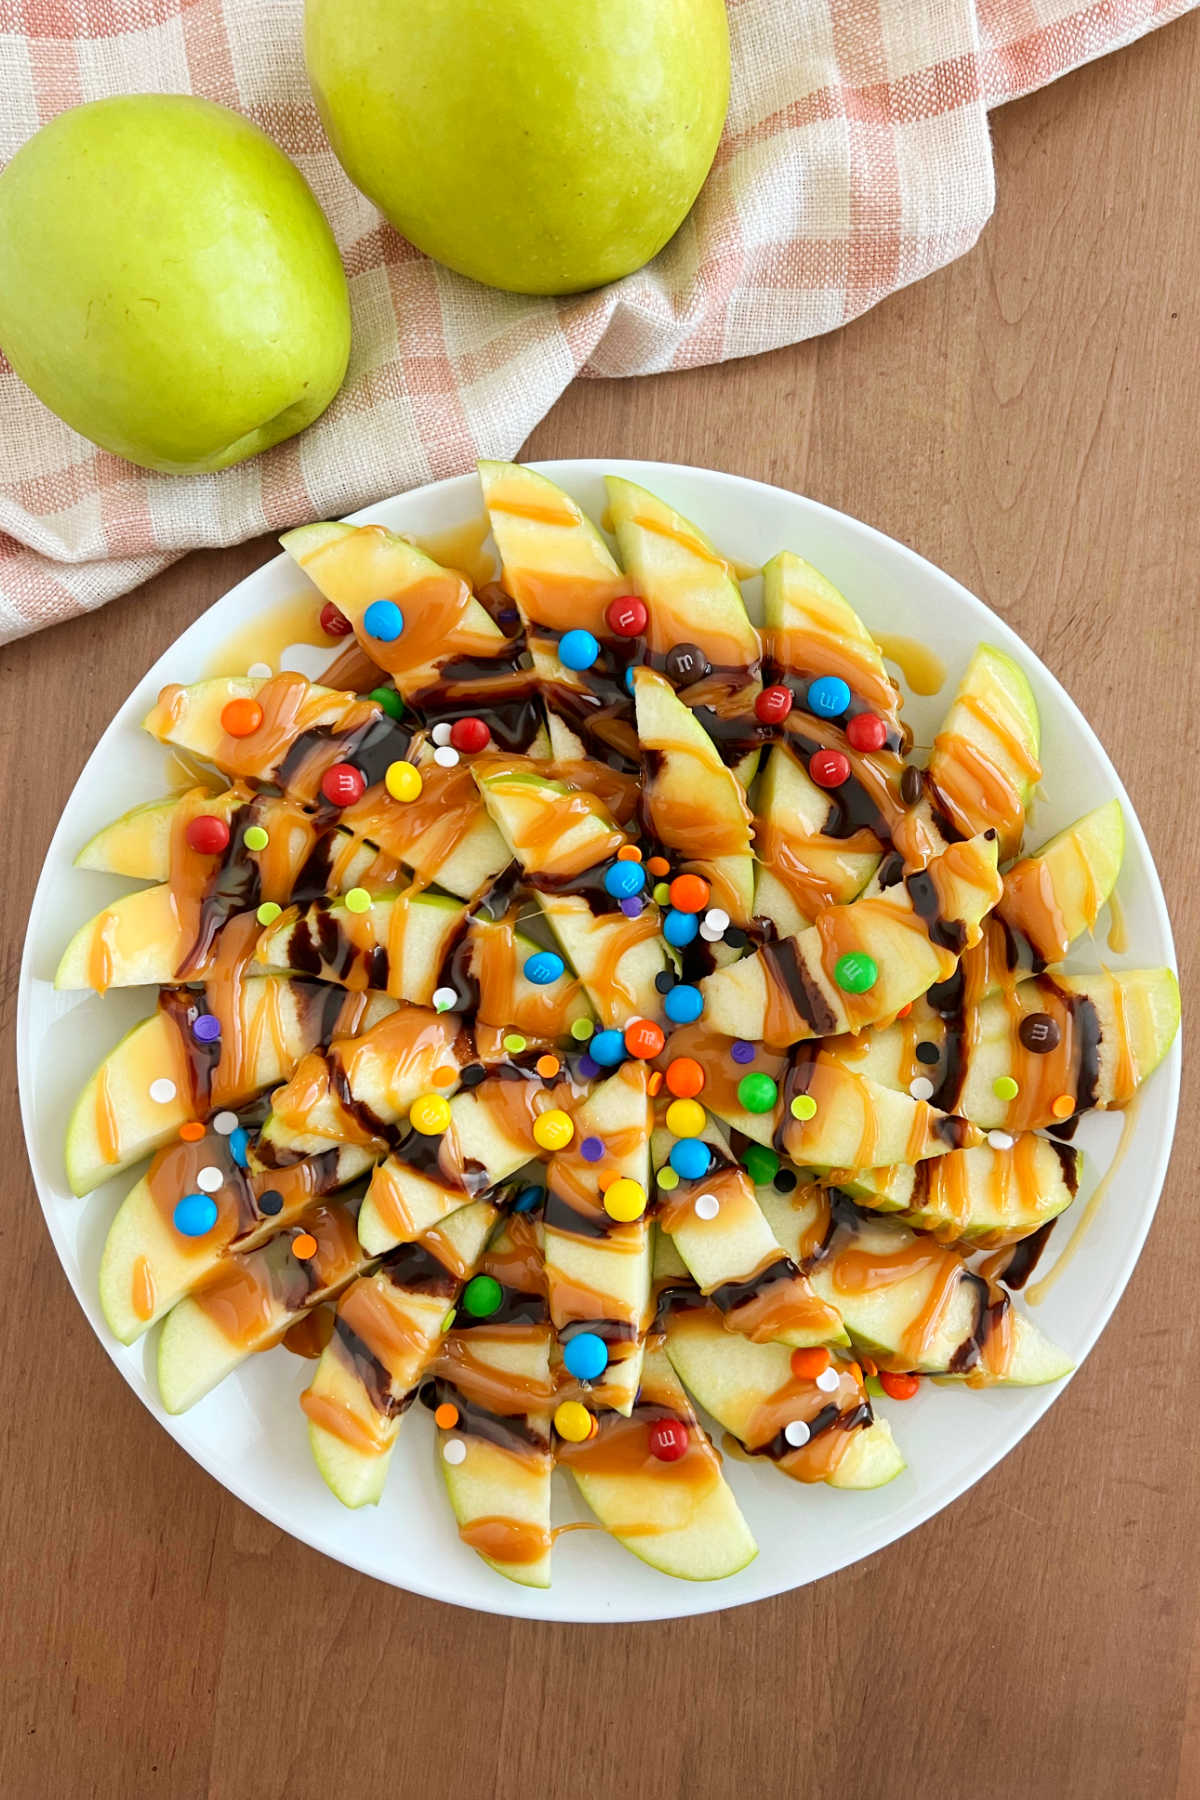 caramel apple slices with chocolate and candies served liked nachos on a platter